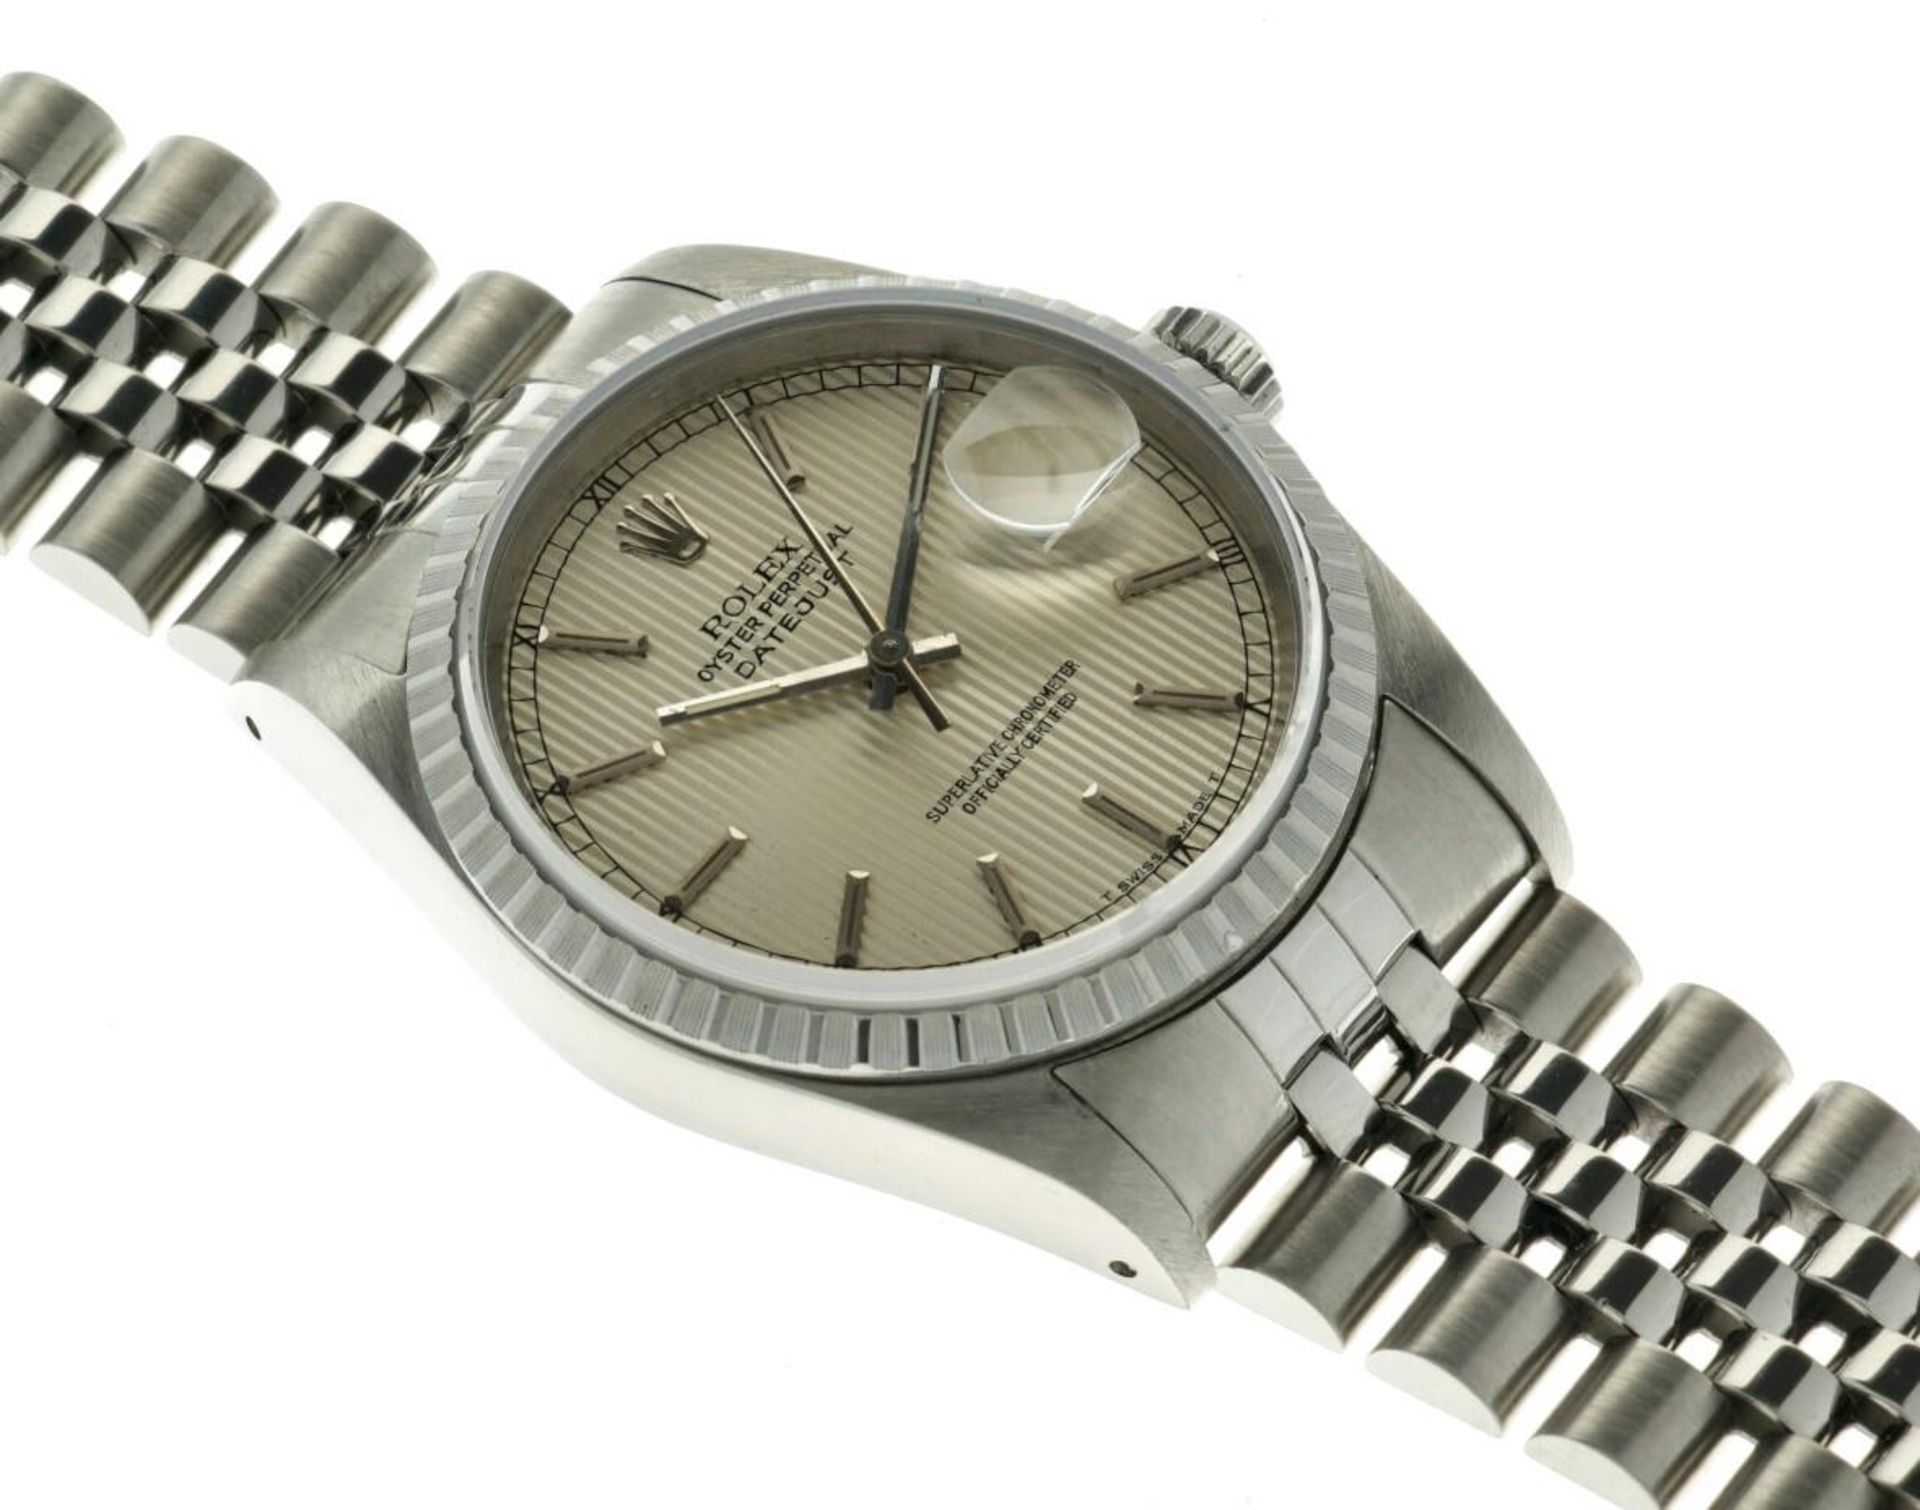 Rolex Datejust Tapestry 16220 - Men's watch - apprx. 1988. - Image 6 of 7